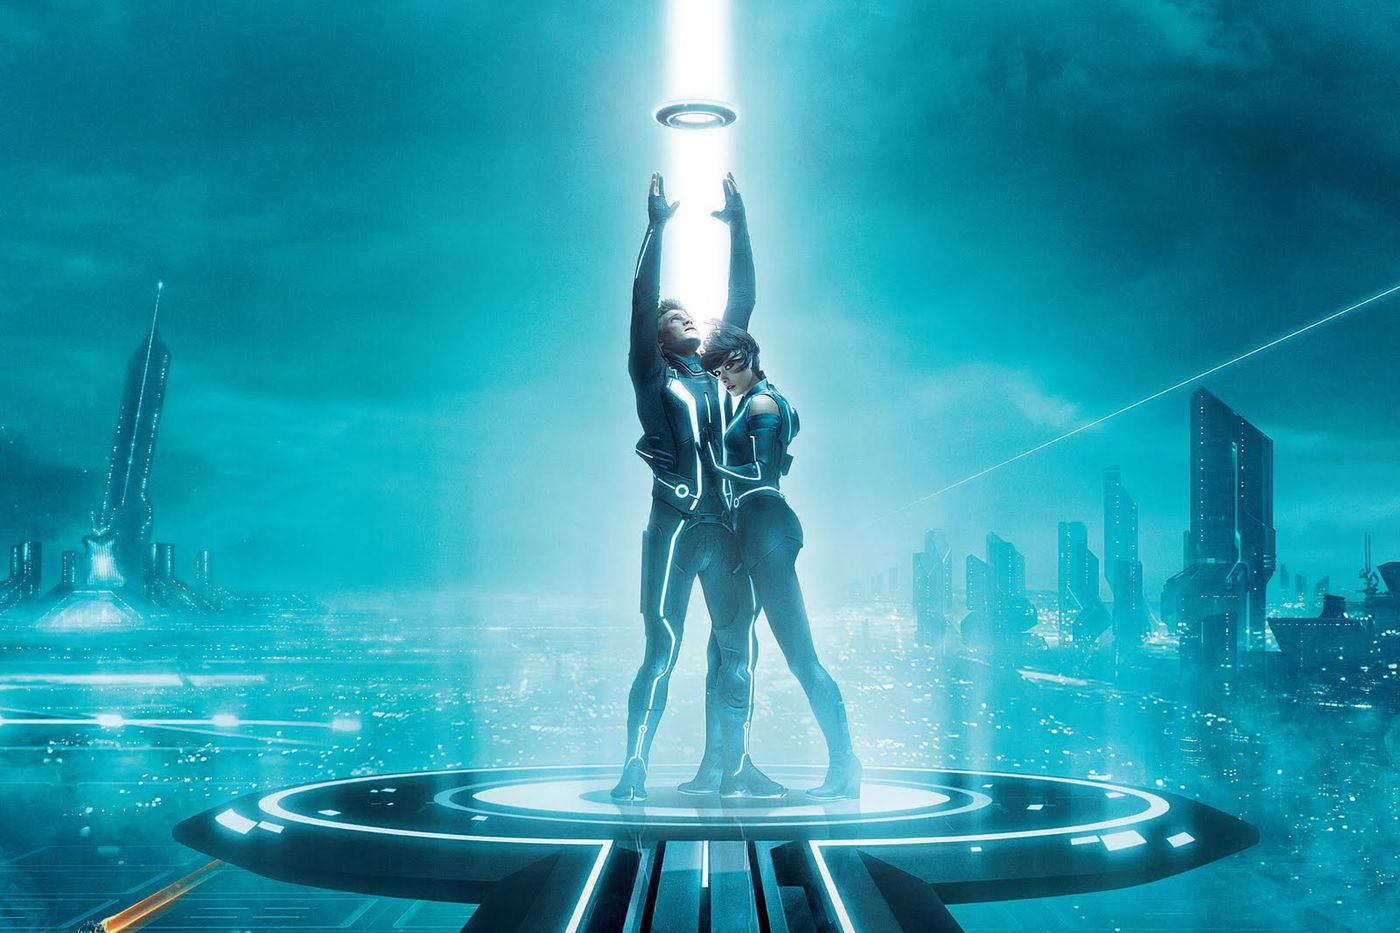 Unpopular Movie Opinions - Tron Legacy was alright